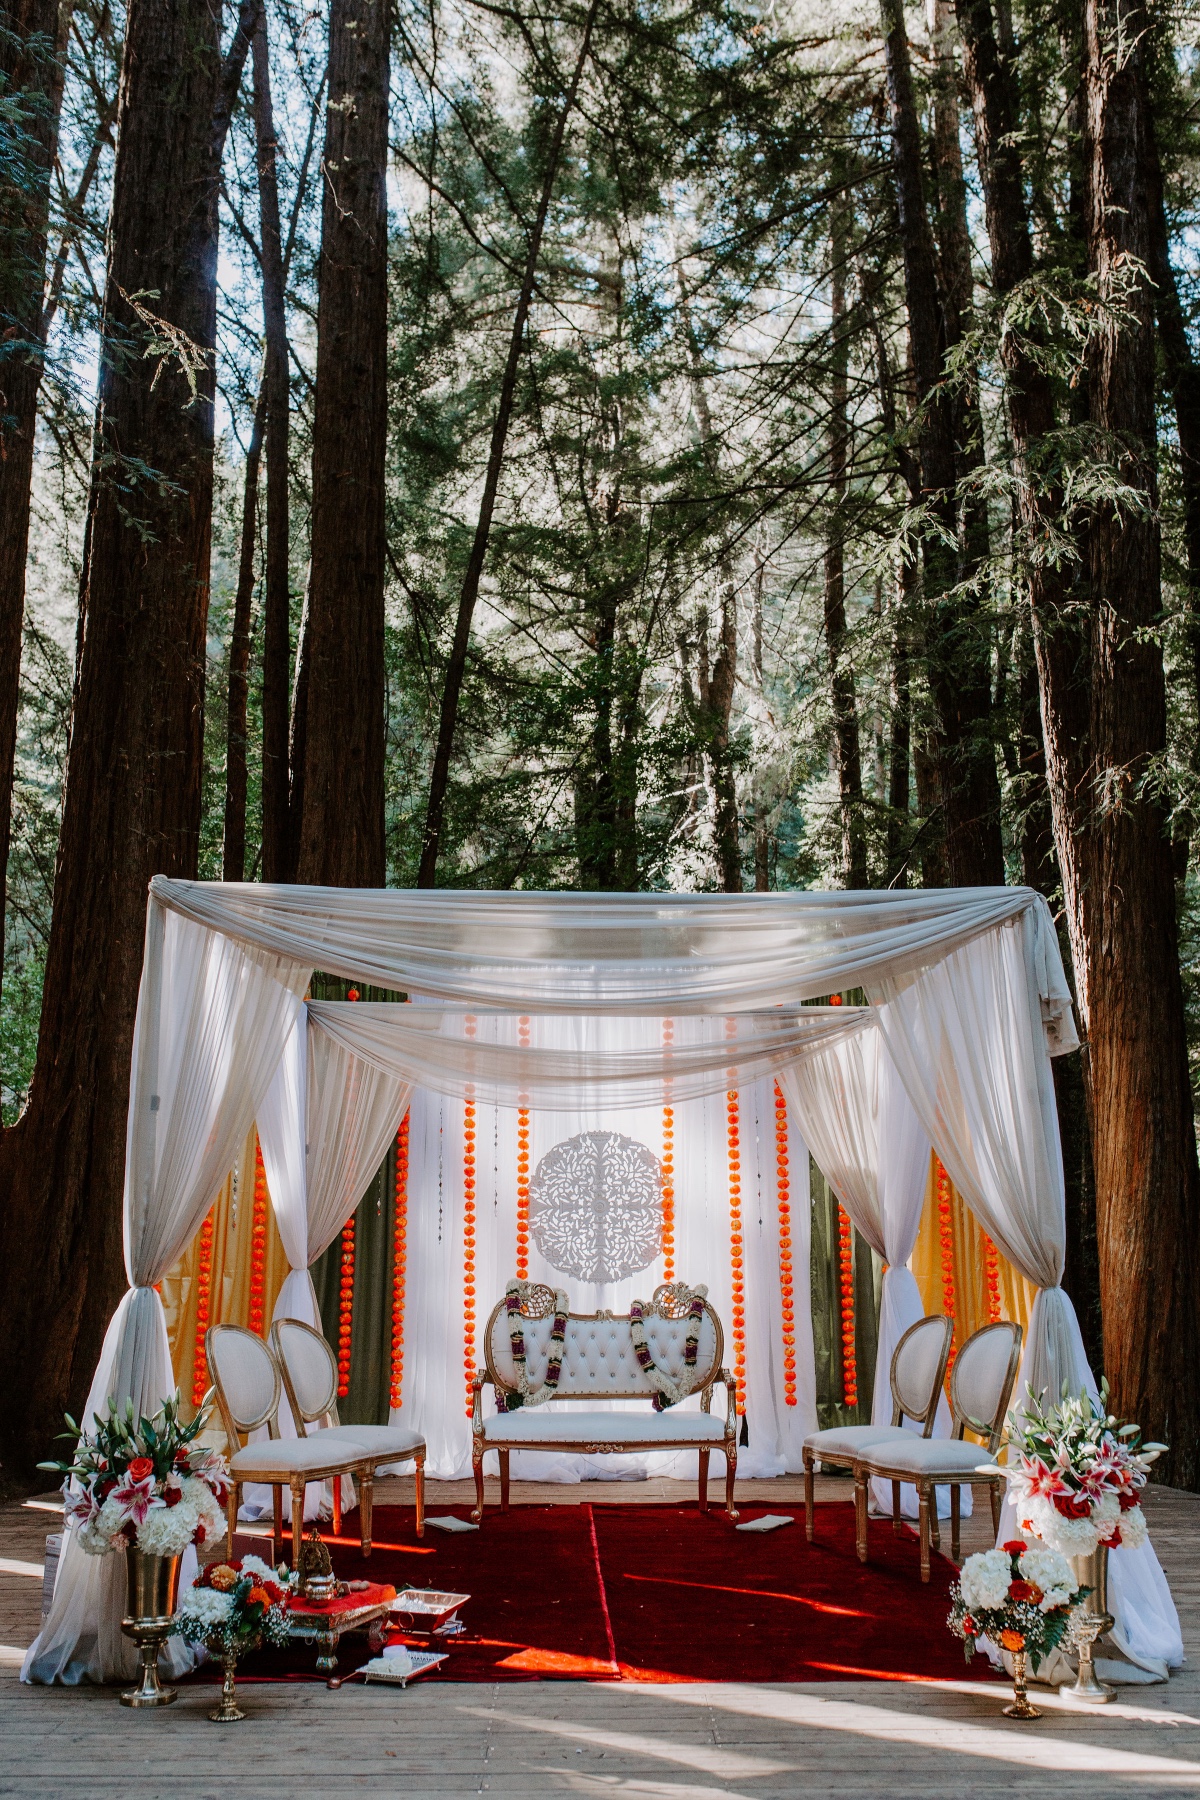 Traditional Hindu wedding in the redwoods